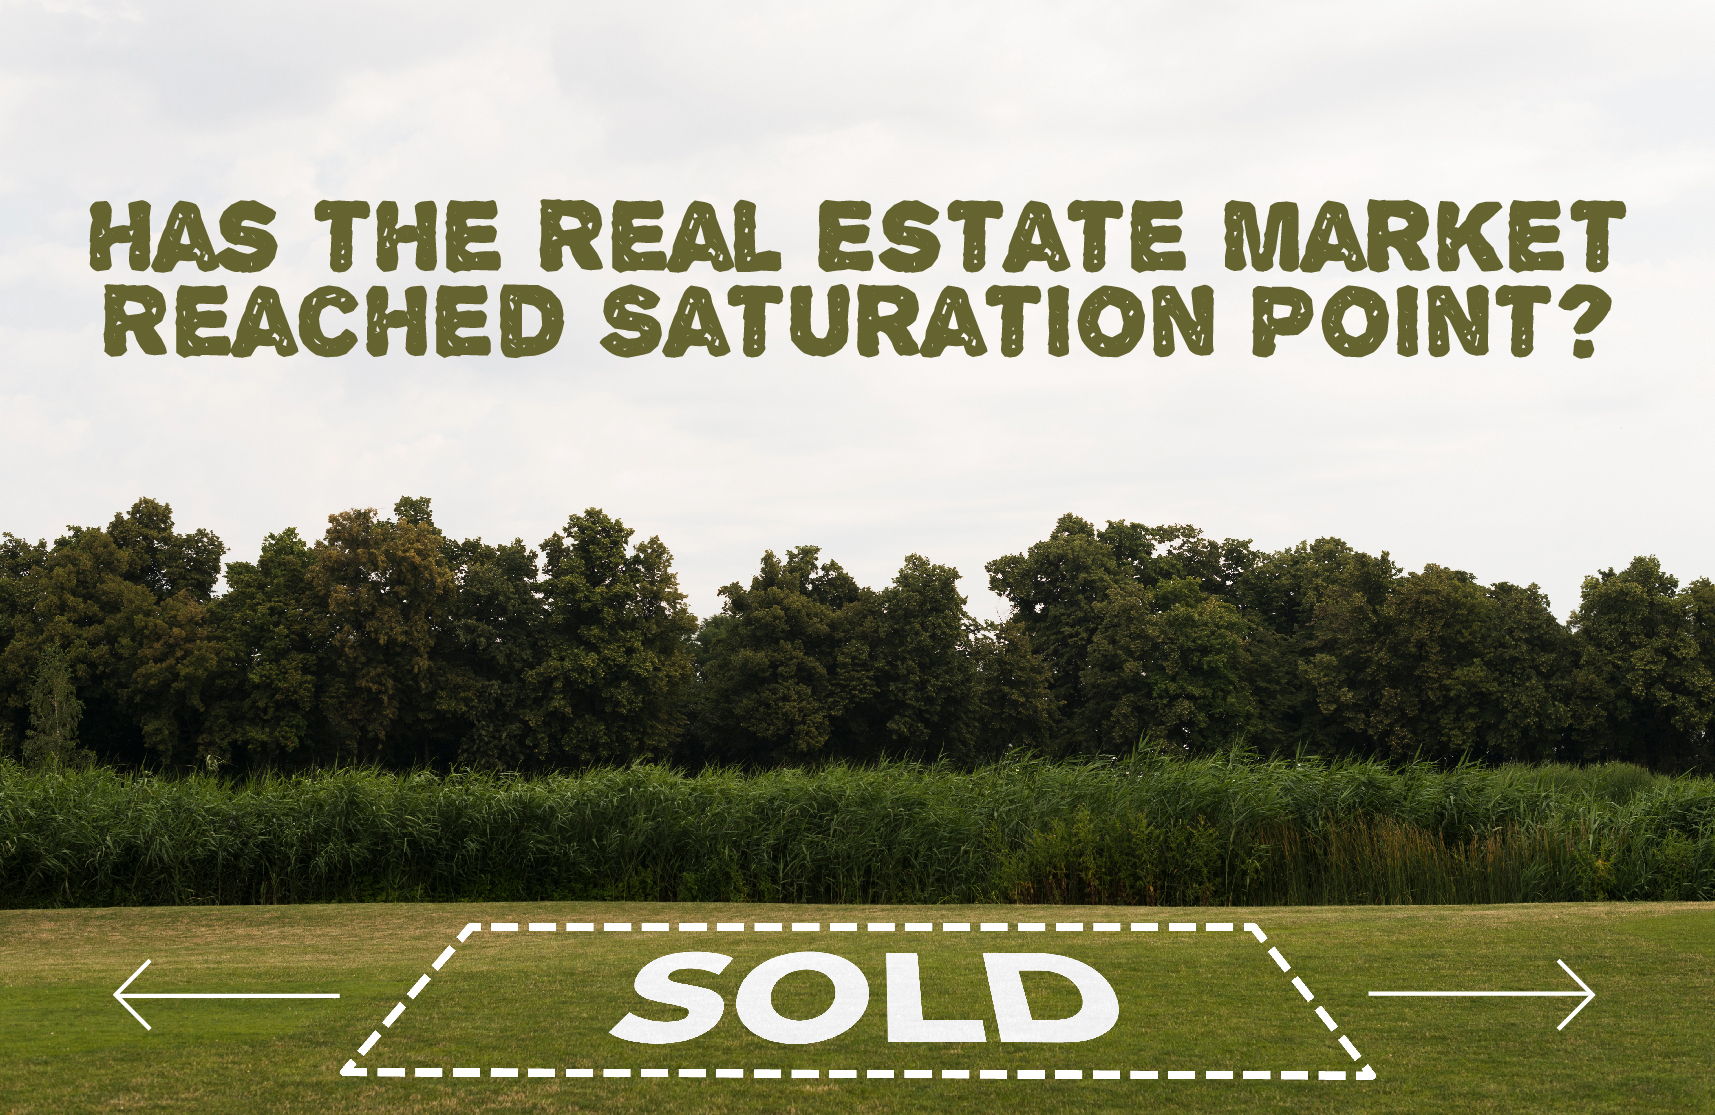 Has the Real Estate Market Reached Saturation Point?